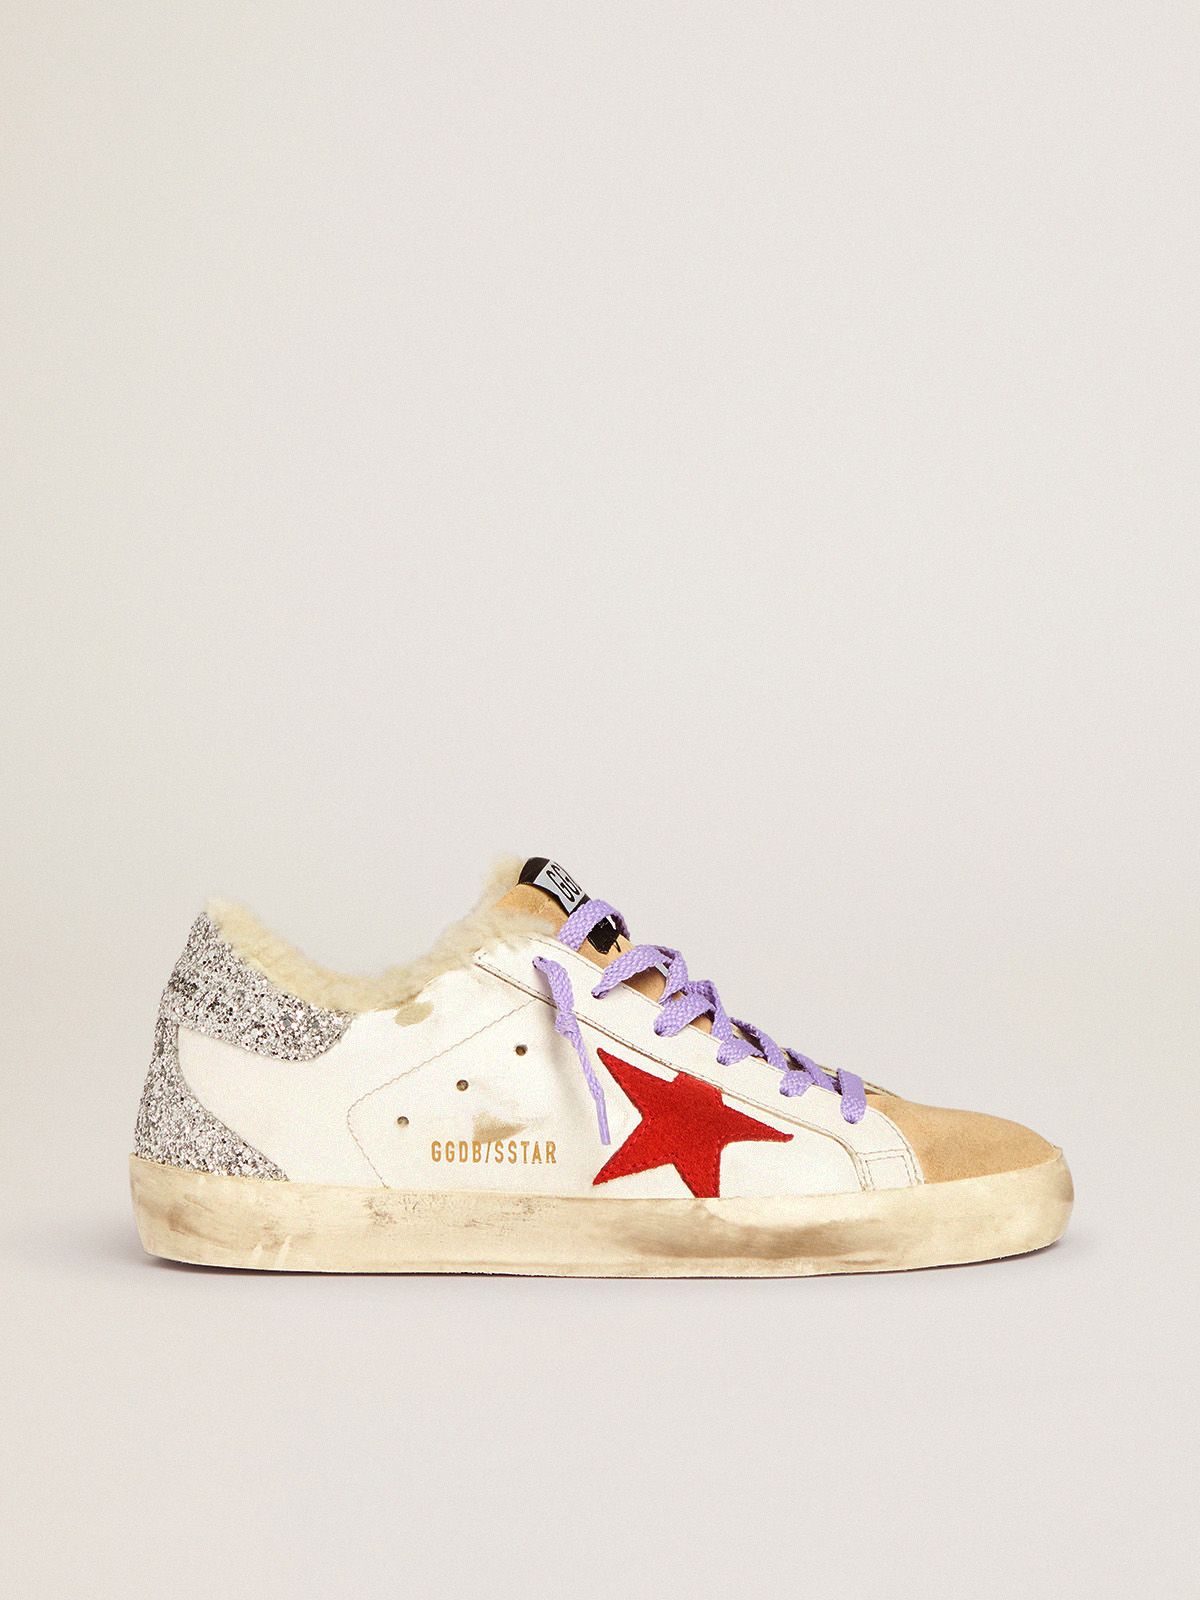 golden goose Super-Star sneakers star suede with and shearling red lining